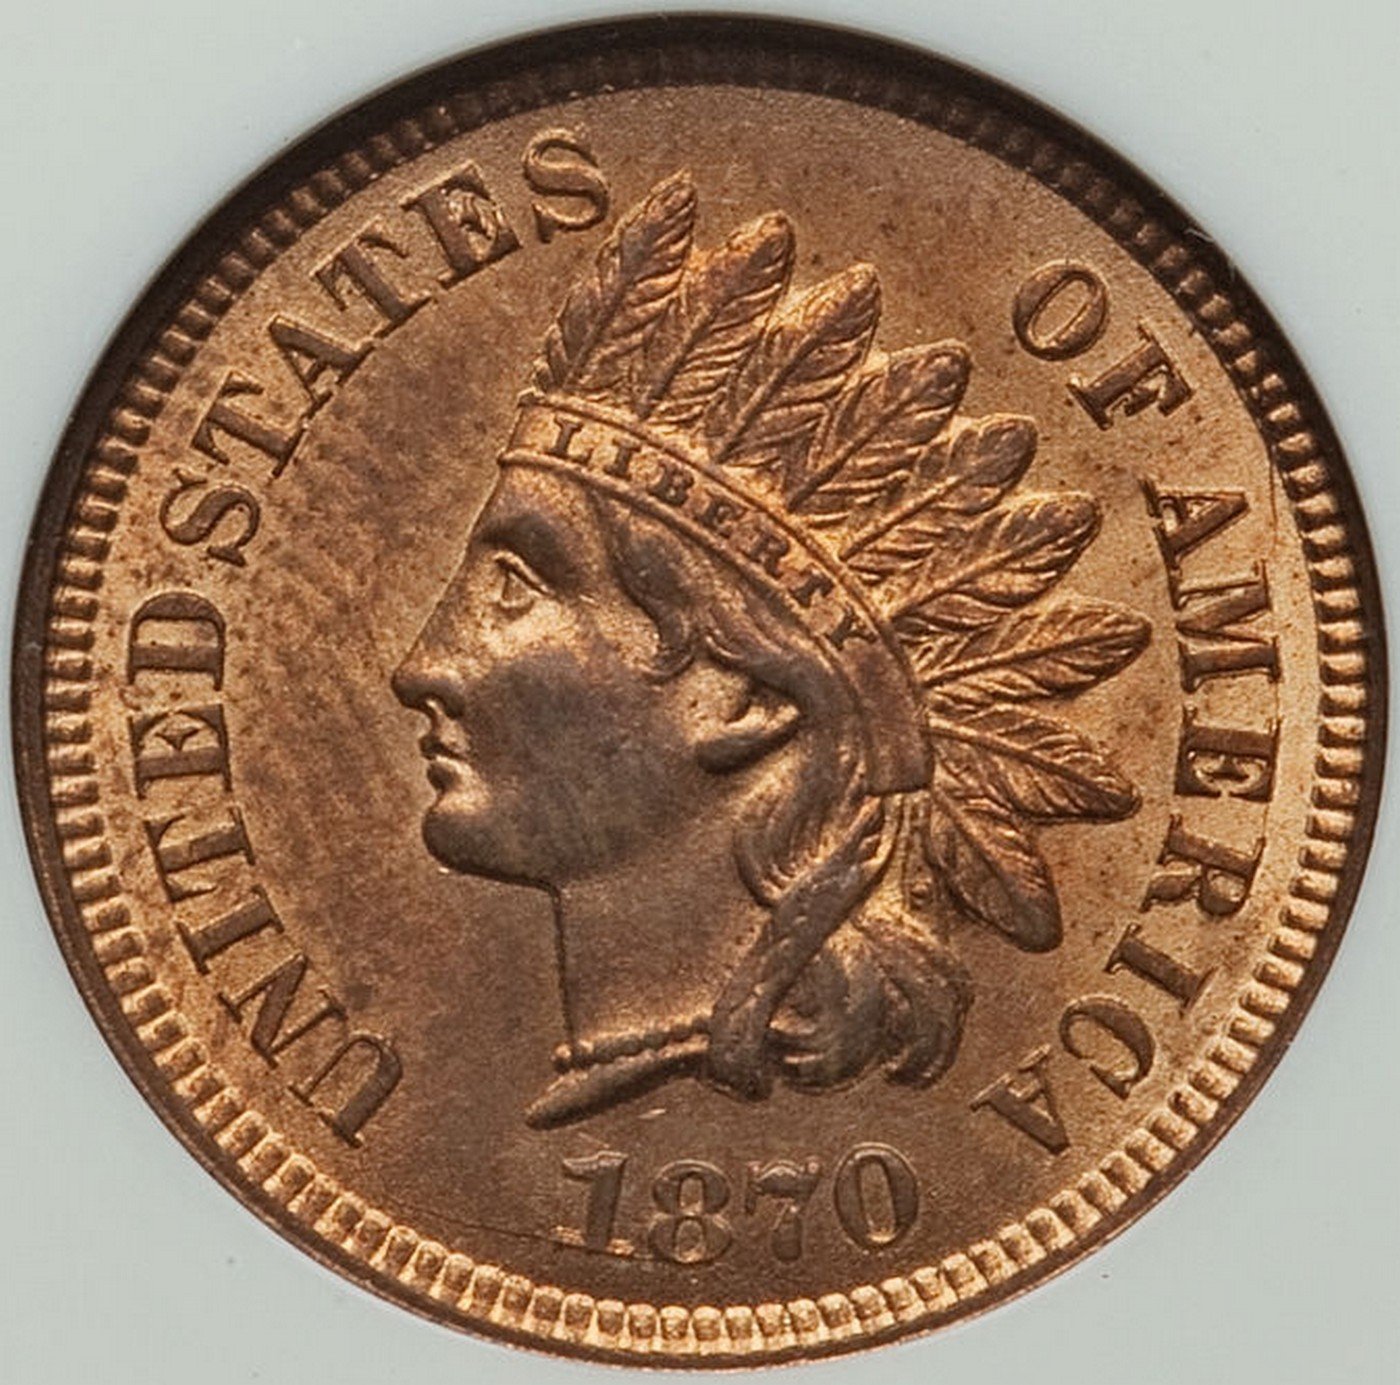 1870 RPD-004 Indian Head Penny - Photos courtesy of Heritage Auctions